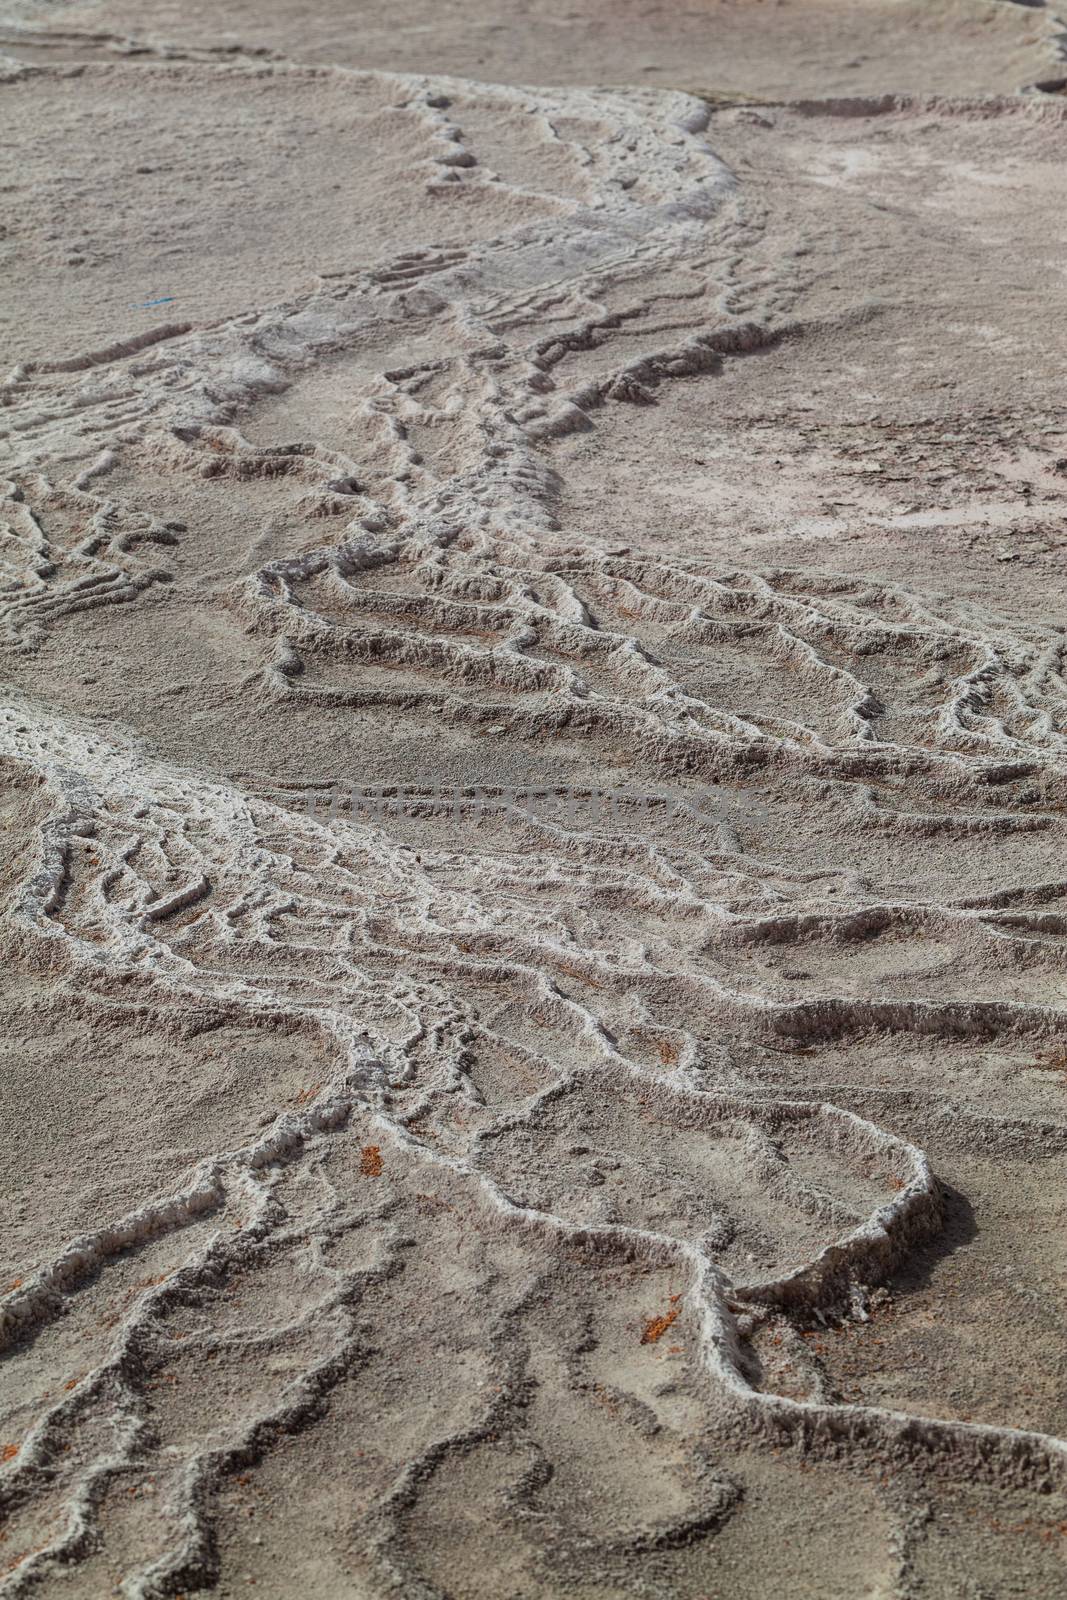 Relieved lines and patterns created in process of drying water with high amount of travertine.